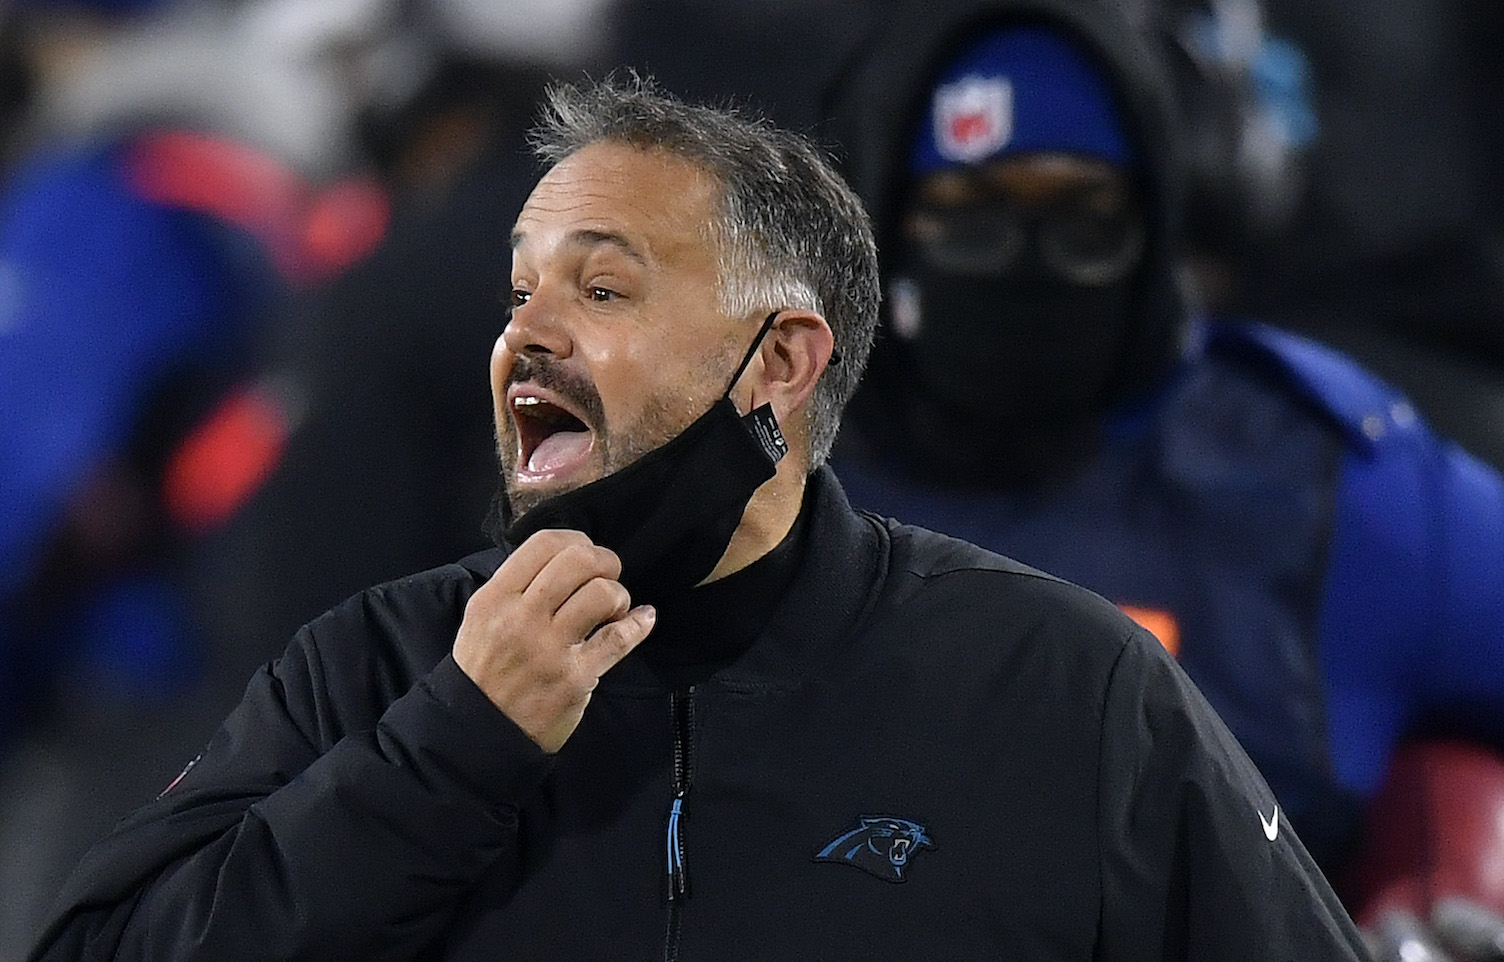 GREEN BAY, WISCONSIN - DECEMBER 19: Head coach Matt Rhule of the Carolina Panthers reacts from the sidelines during the first half of the game against the Green Bay Packers at Lambeau Field on December 19, 2020 in Green Bay, Wisconsin. (Photo by Quinn Harris/Getty Images)